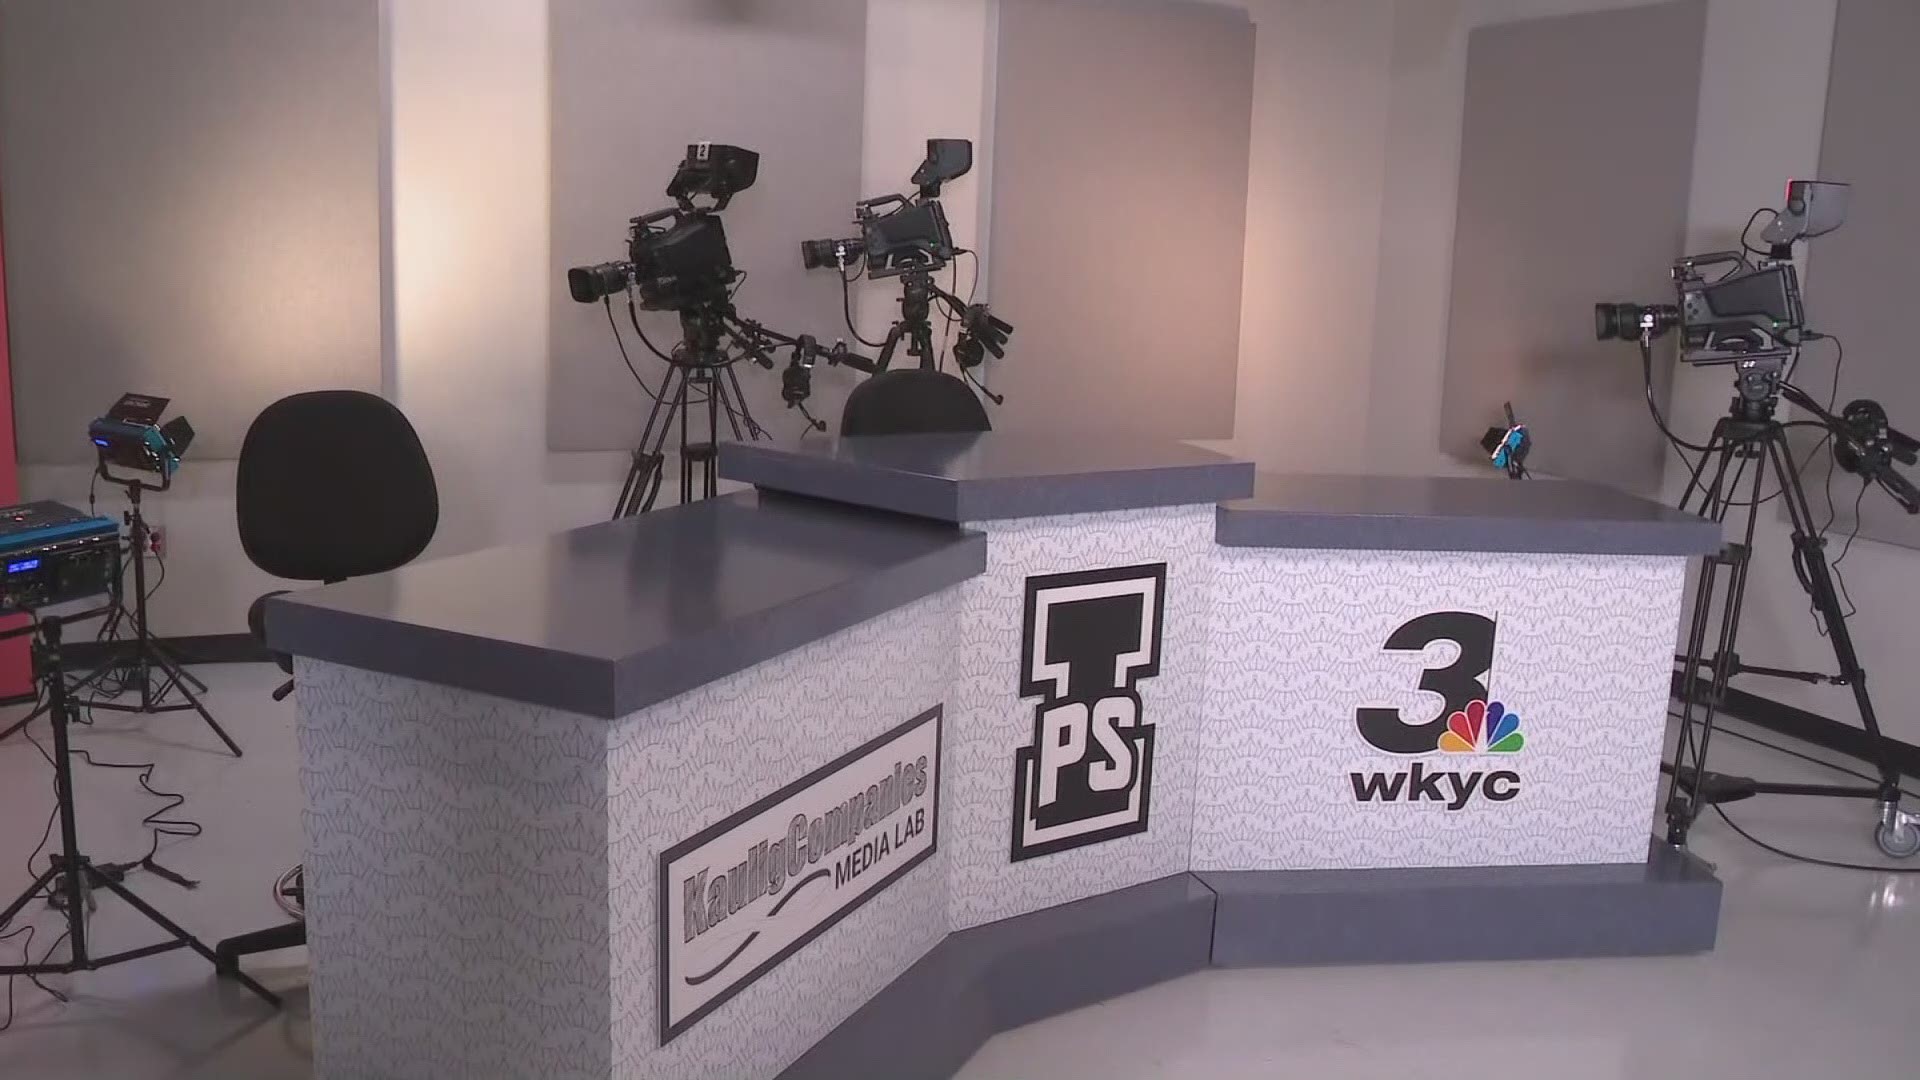 A state-of-the-art media lab that gives students a real world taste of the news business will be unveiled Wednesday at the I PROMISE School in Akron